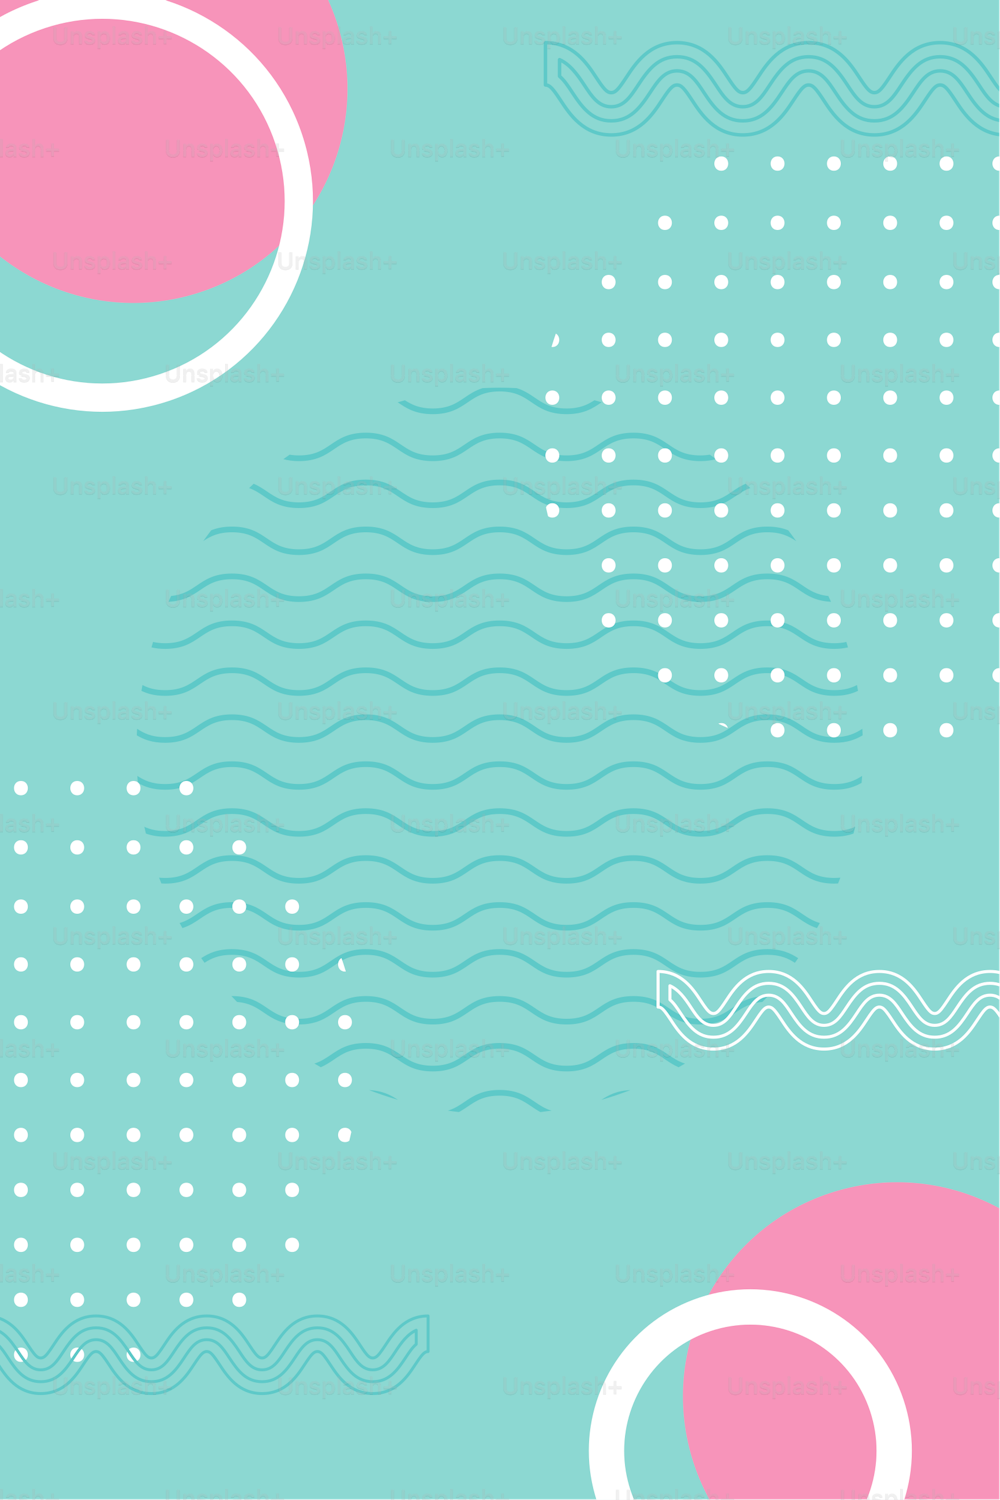 trendy geometric minimal halftone 80s 90s style fashion abstract background vector illustration